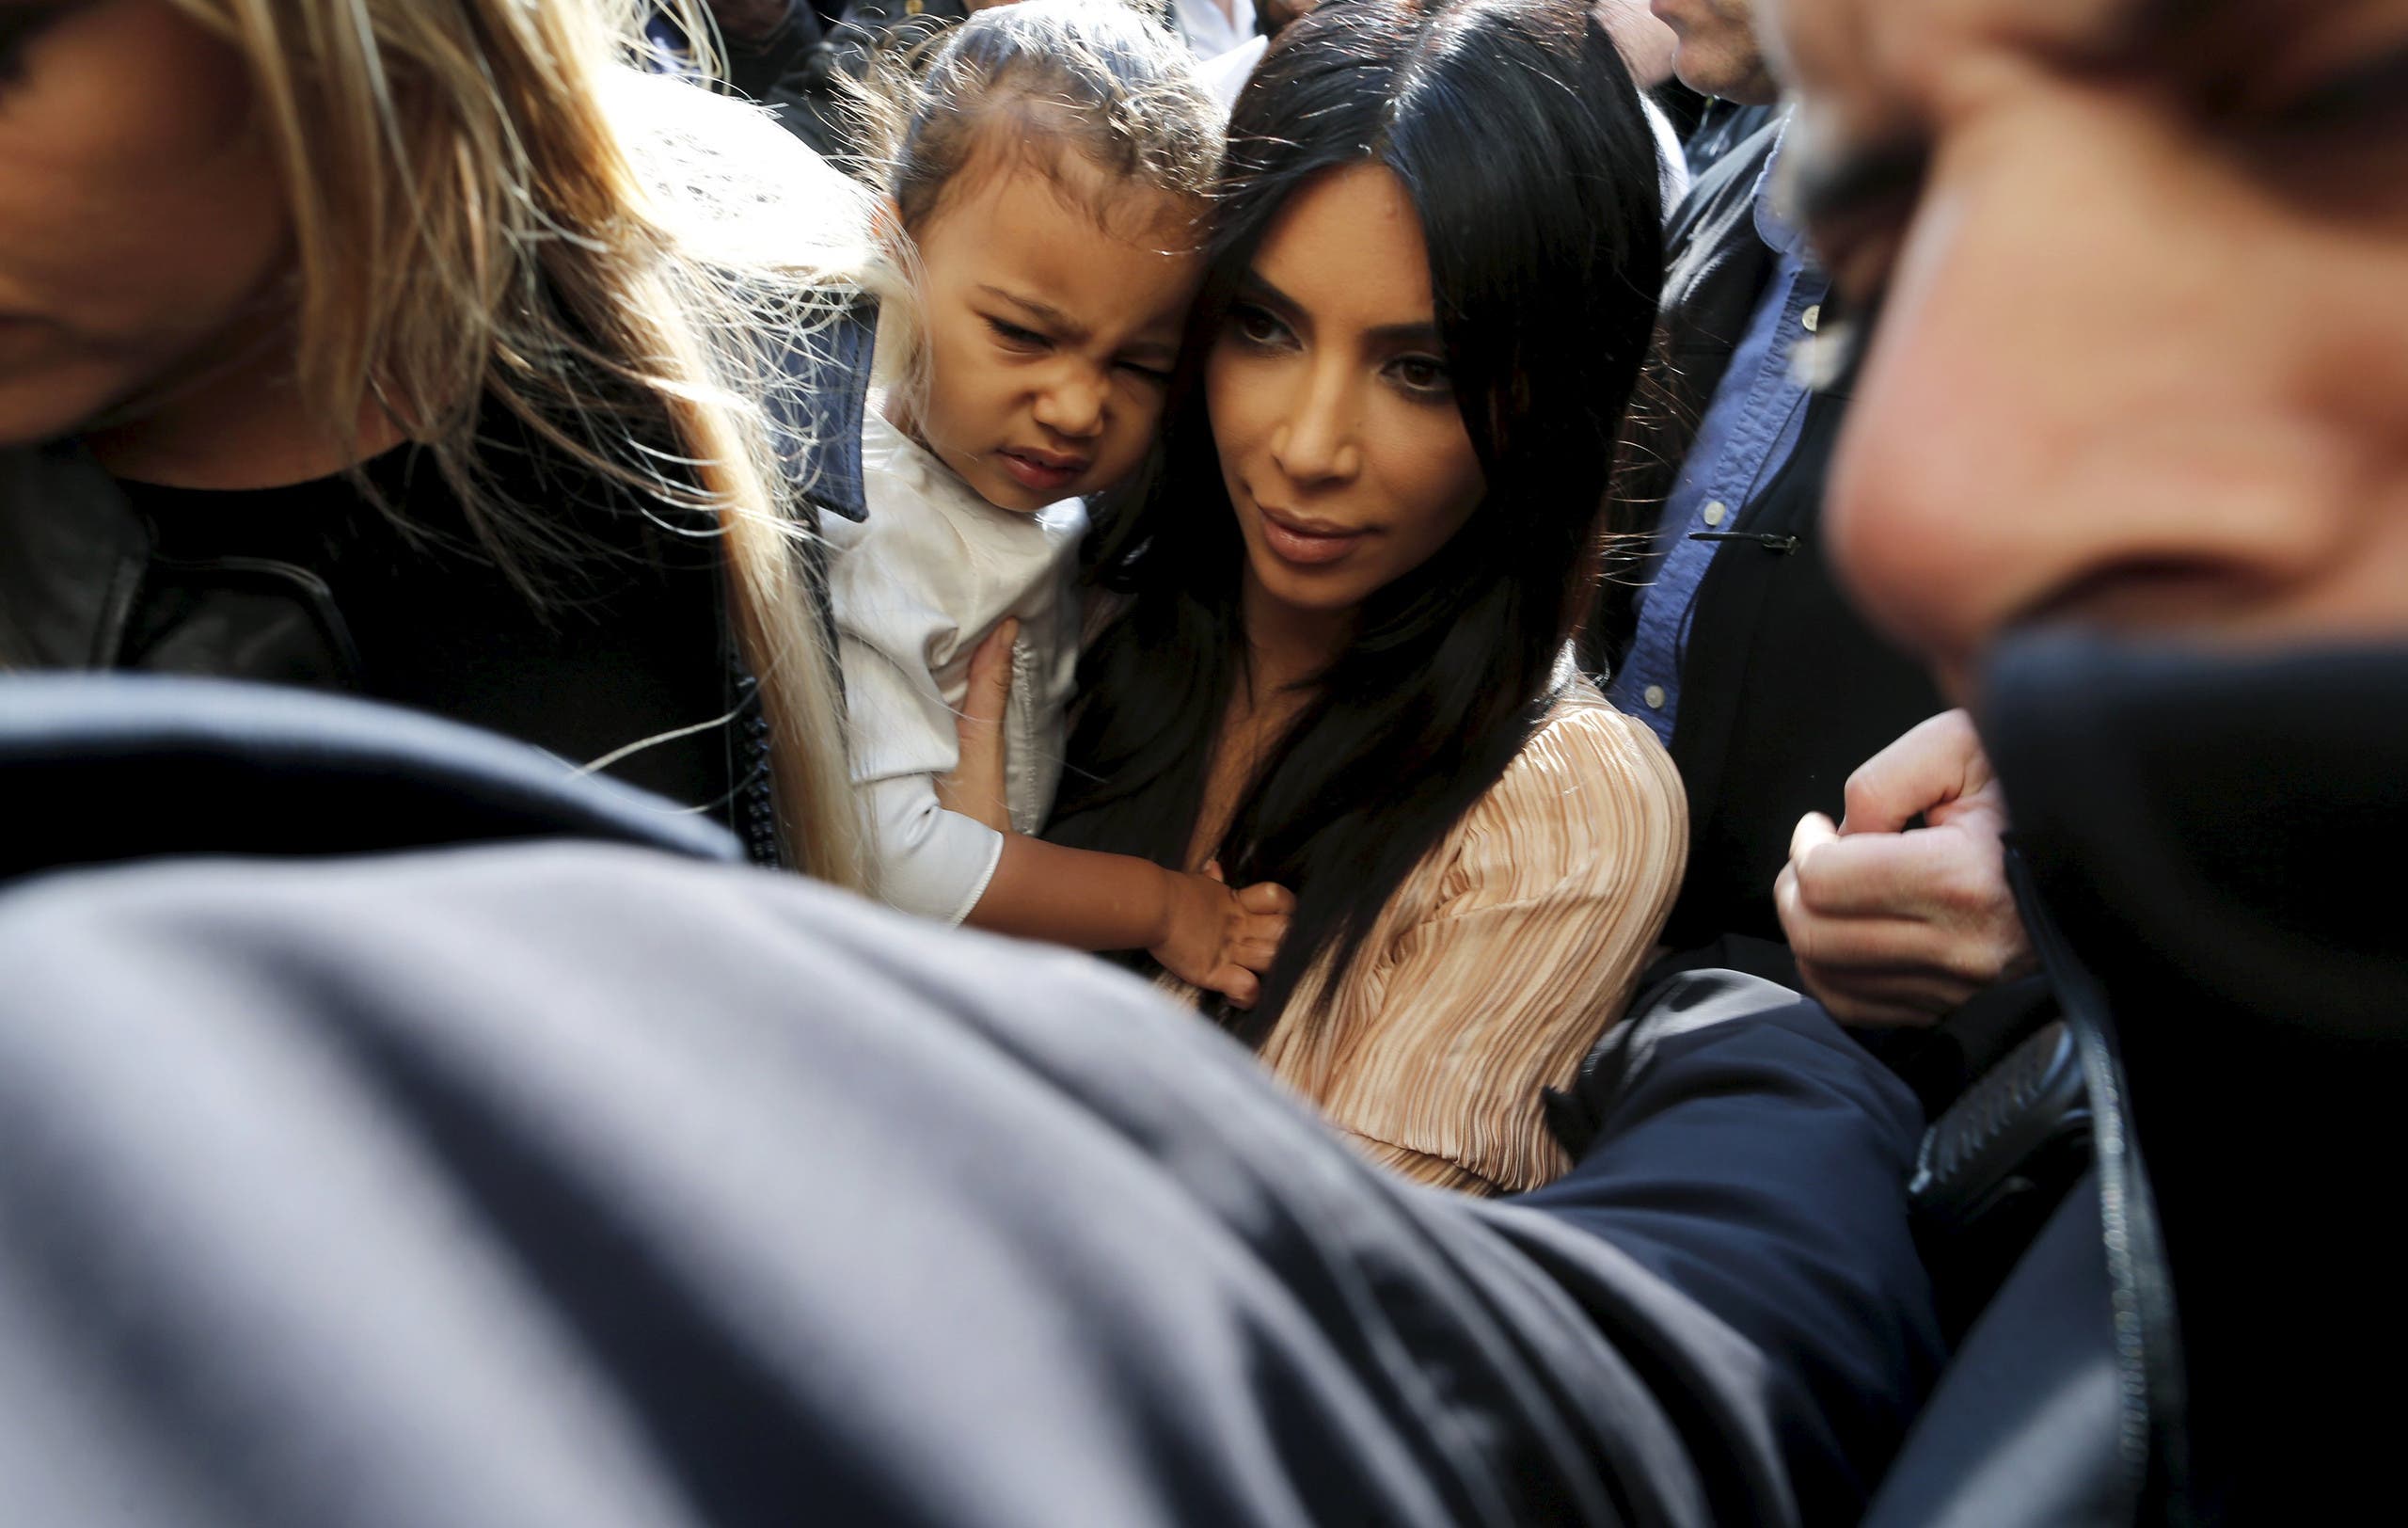 Kim Kardashian holds her toddler daughter North West as they arrive for a baptism ceremony at the Cathedral of Saint James. (Reuters)